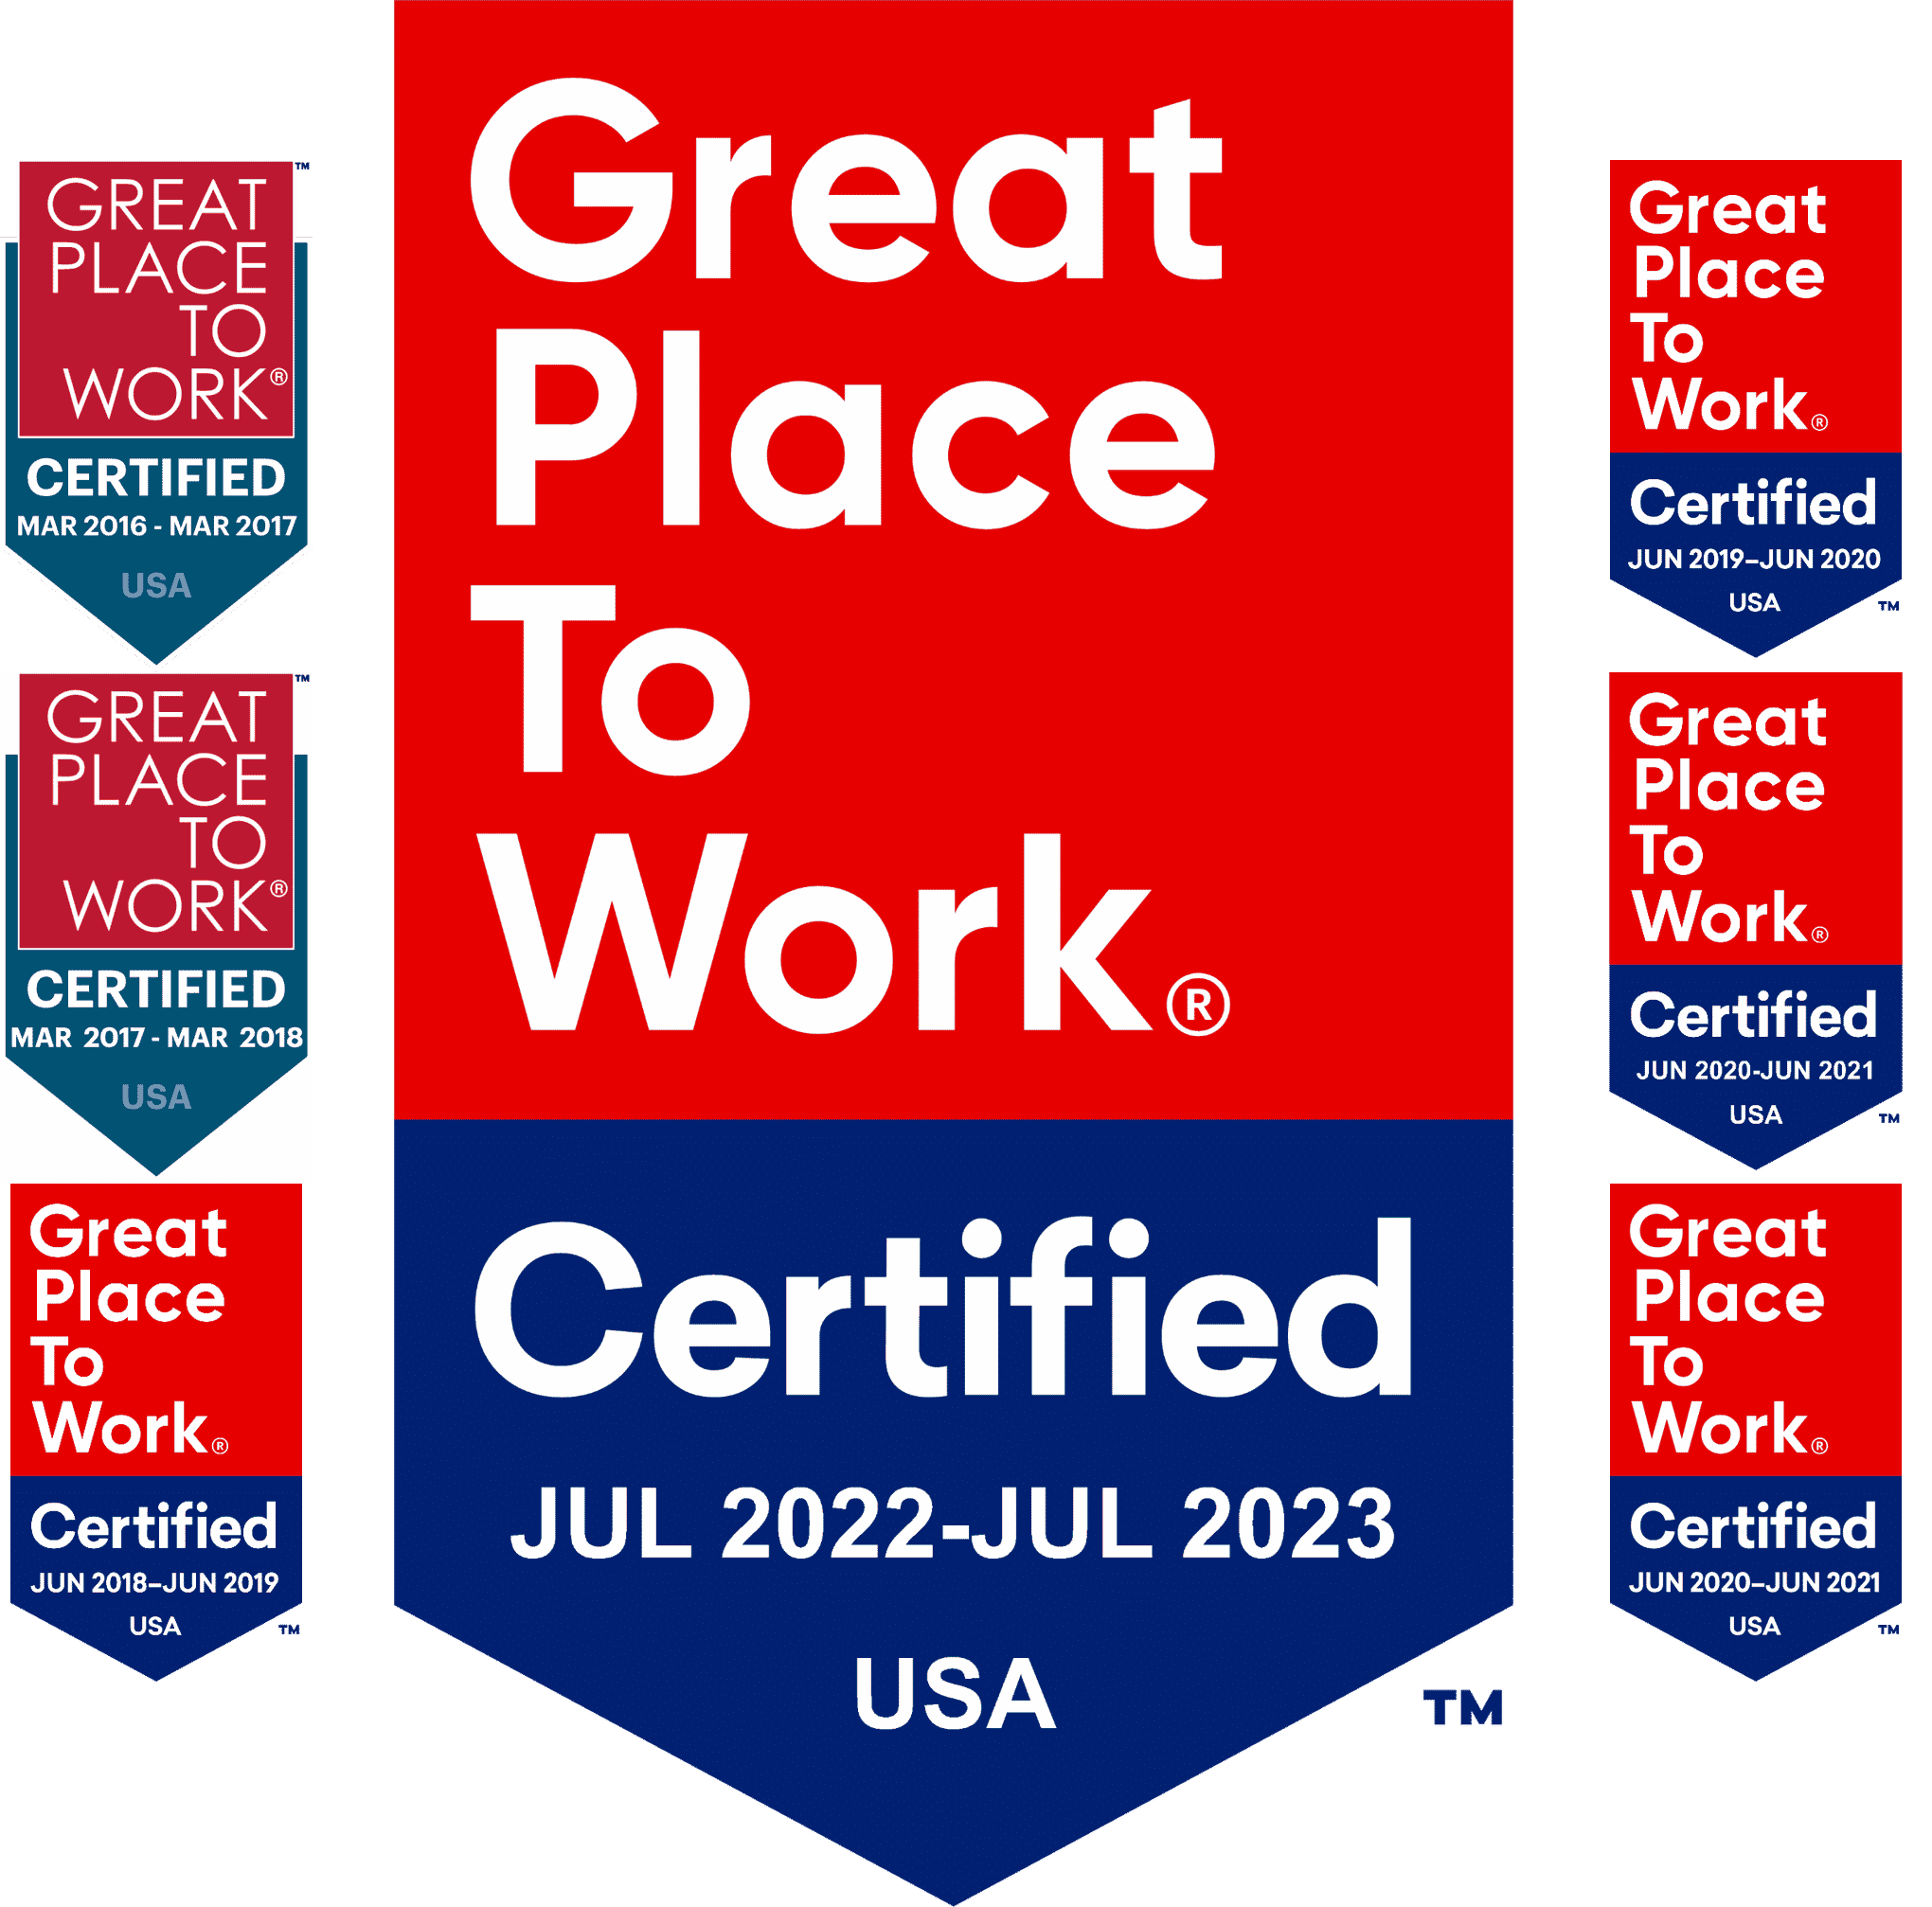 HRMS Earns 2022 Great Place to Work Certification™ for the Seventh Year